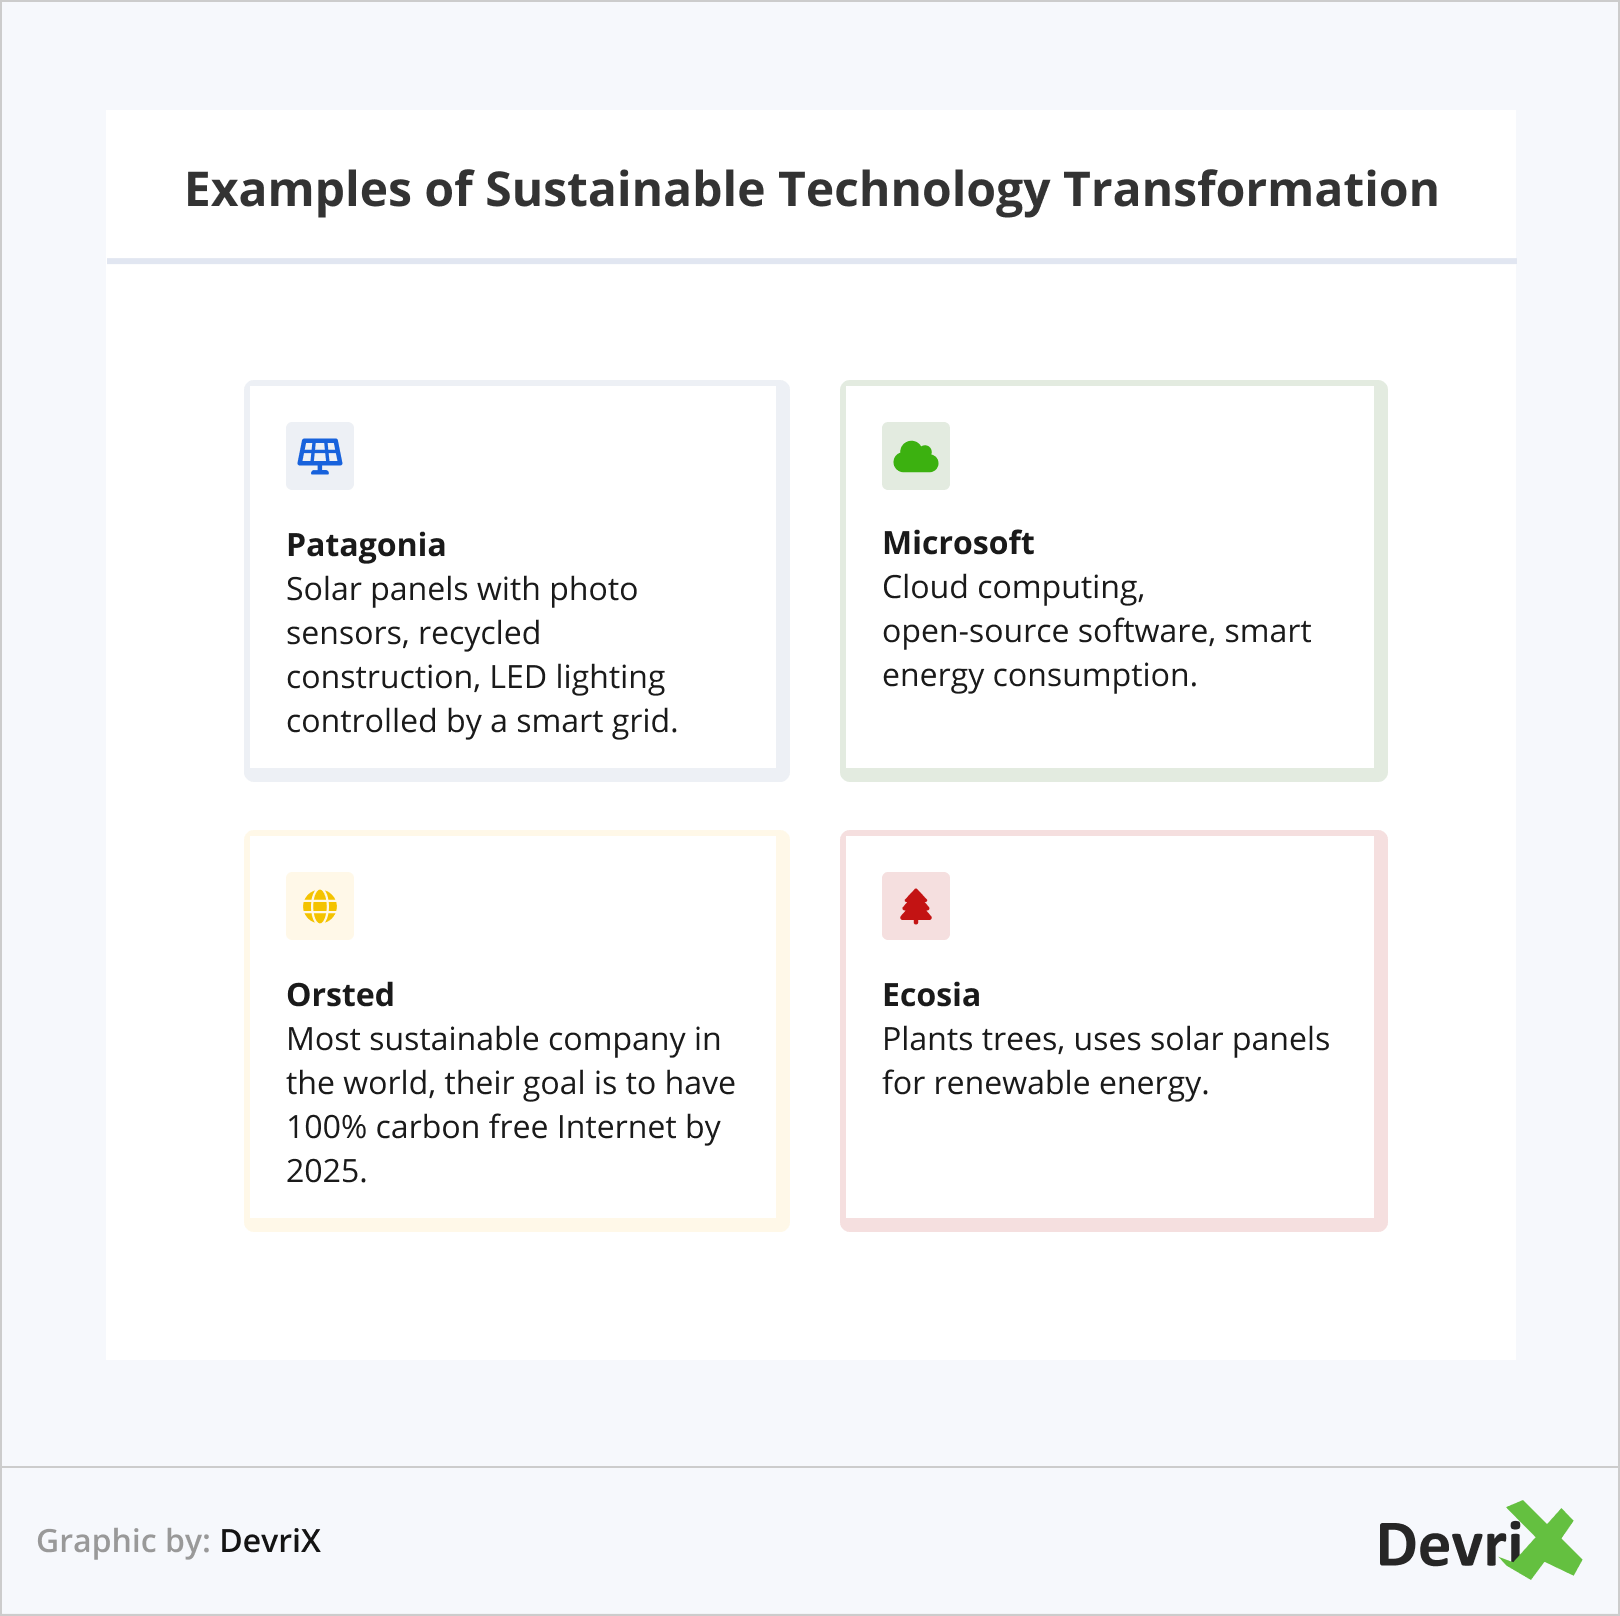 Examples of Sustainable Technology Transformation